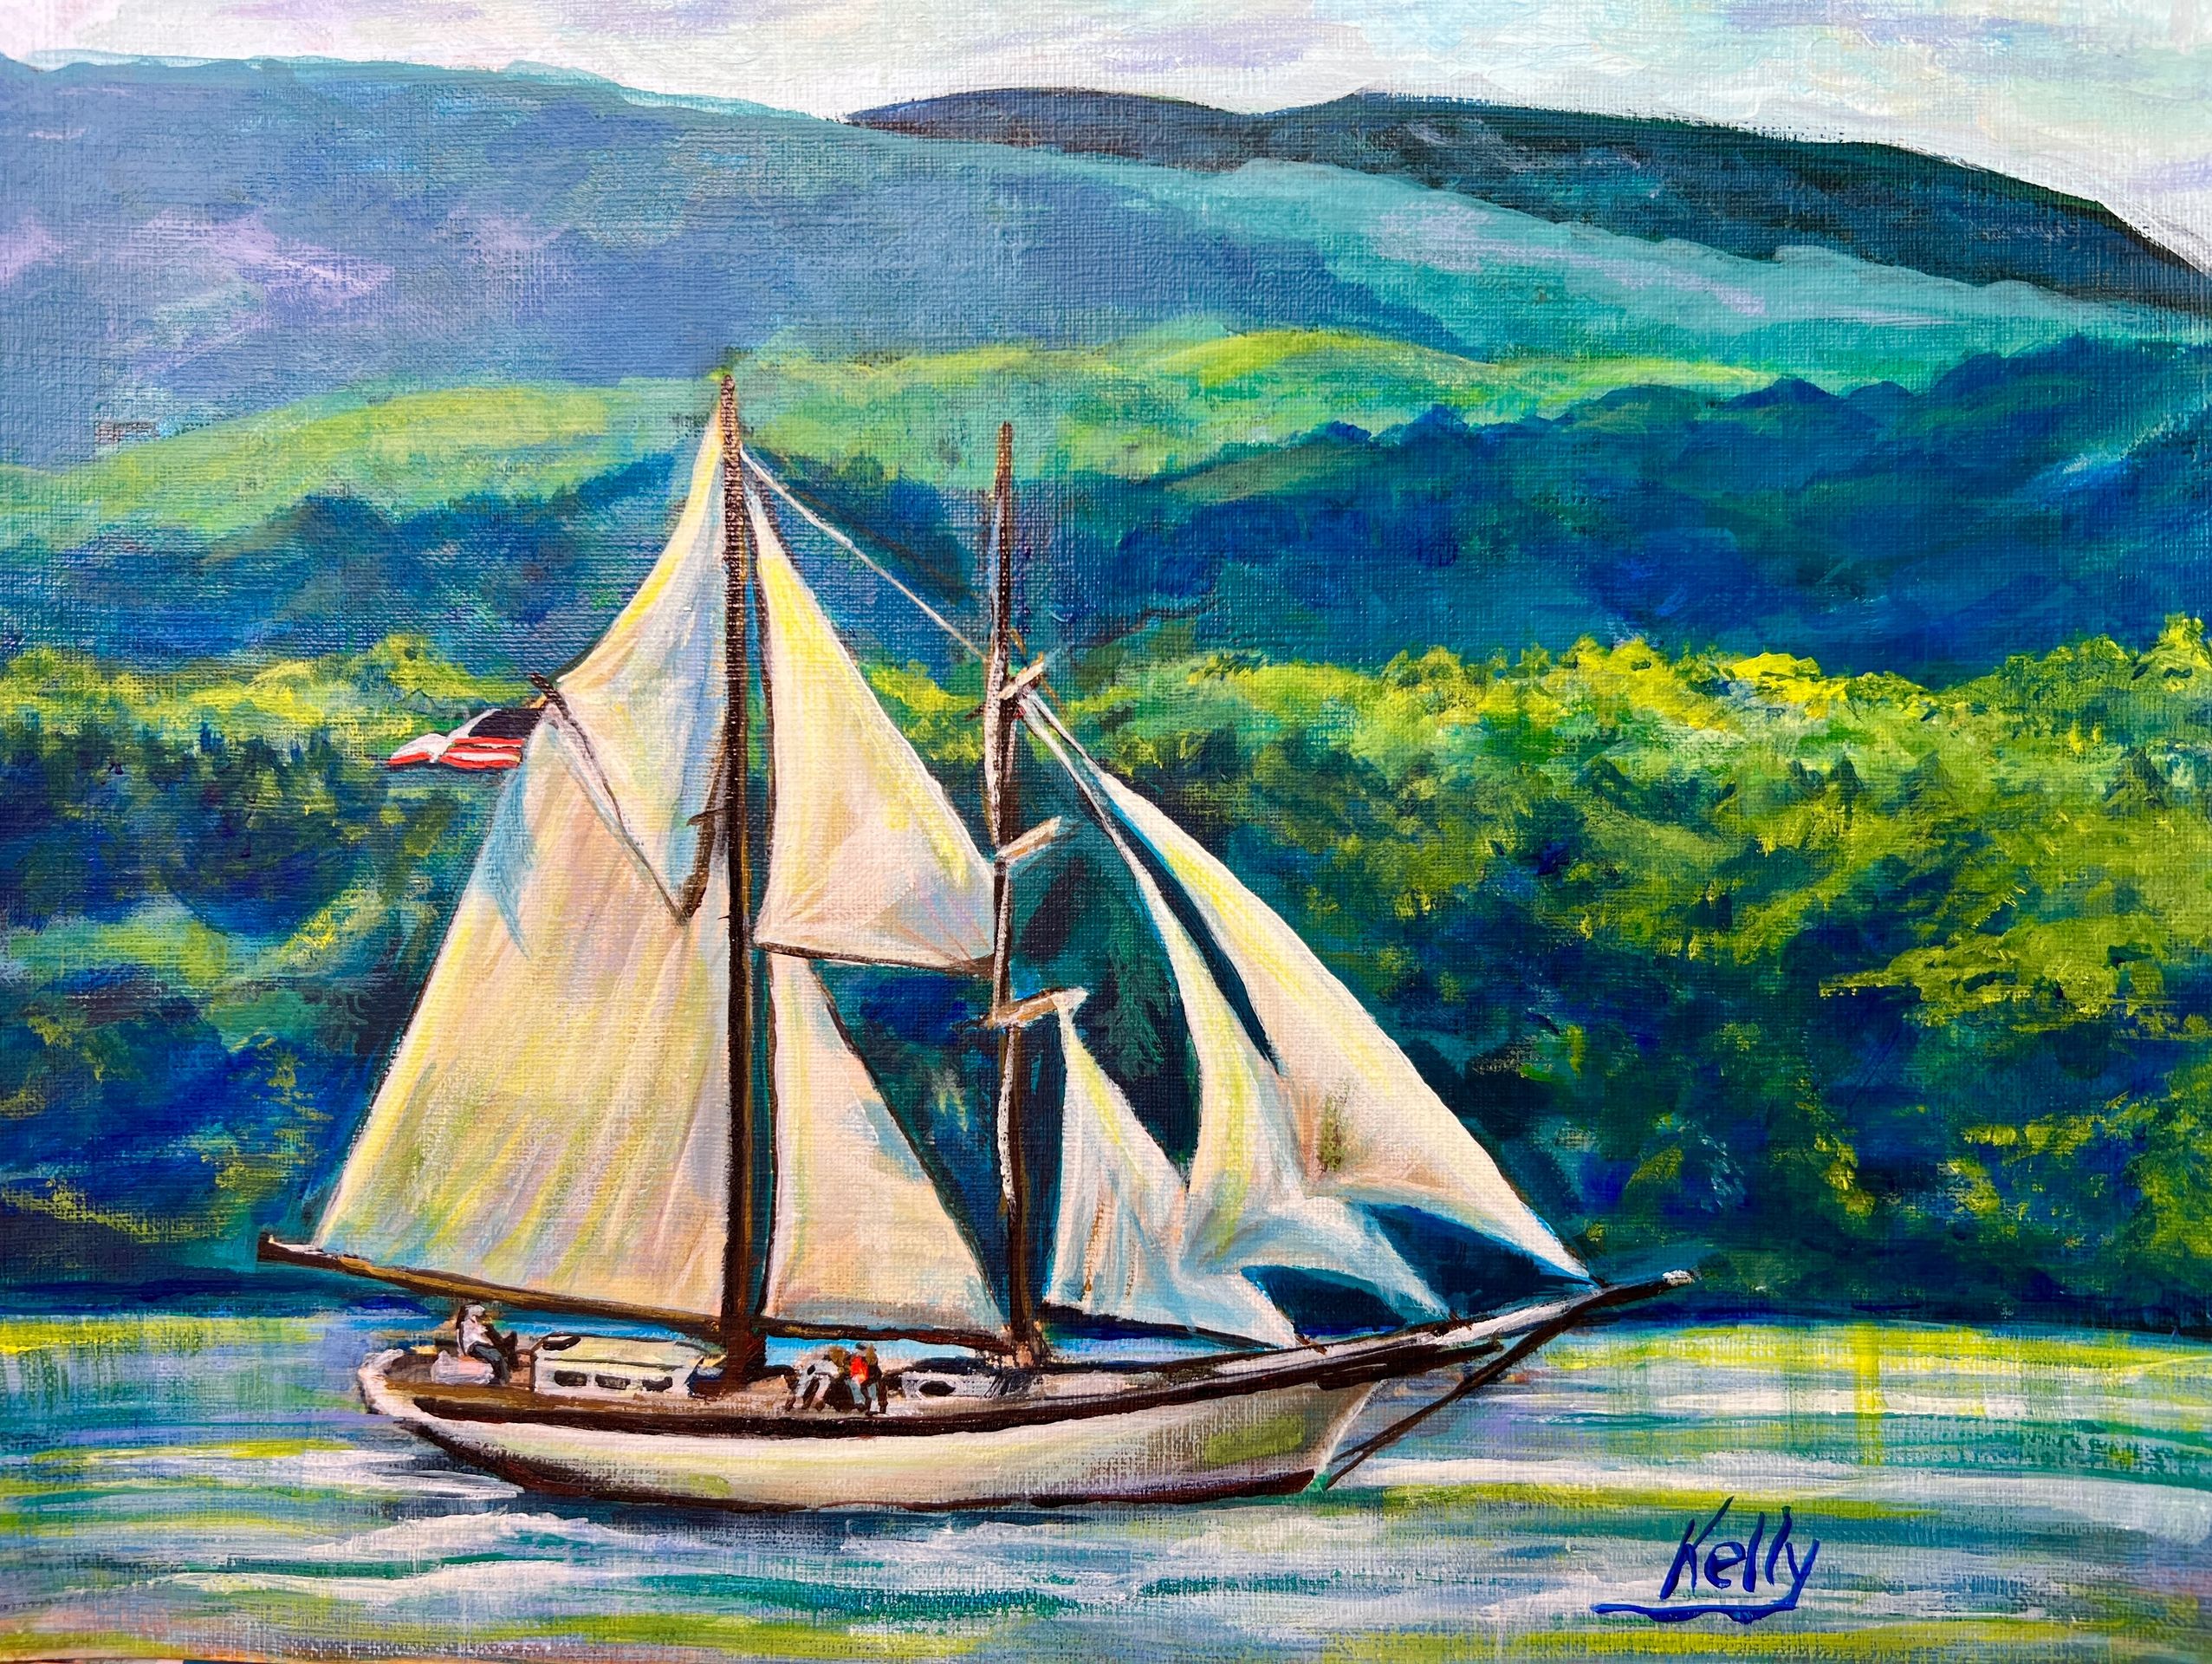 “Tall Ship” was painted from a photo taken of a Tall Ship passing us in Penobscot Bay, Maine.